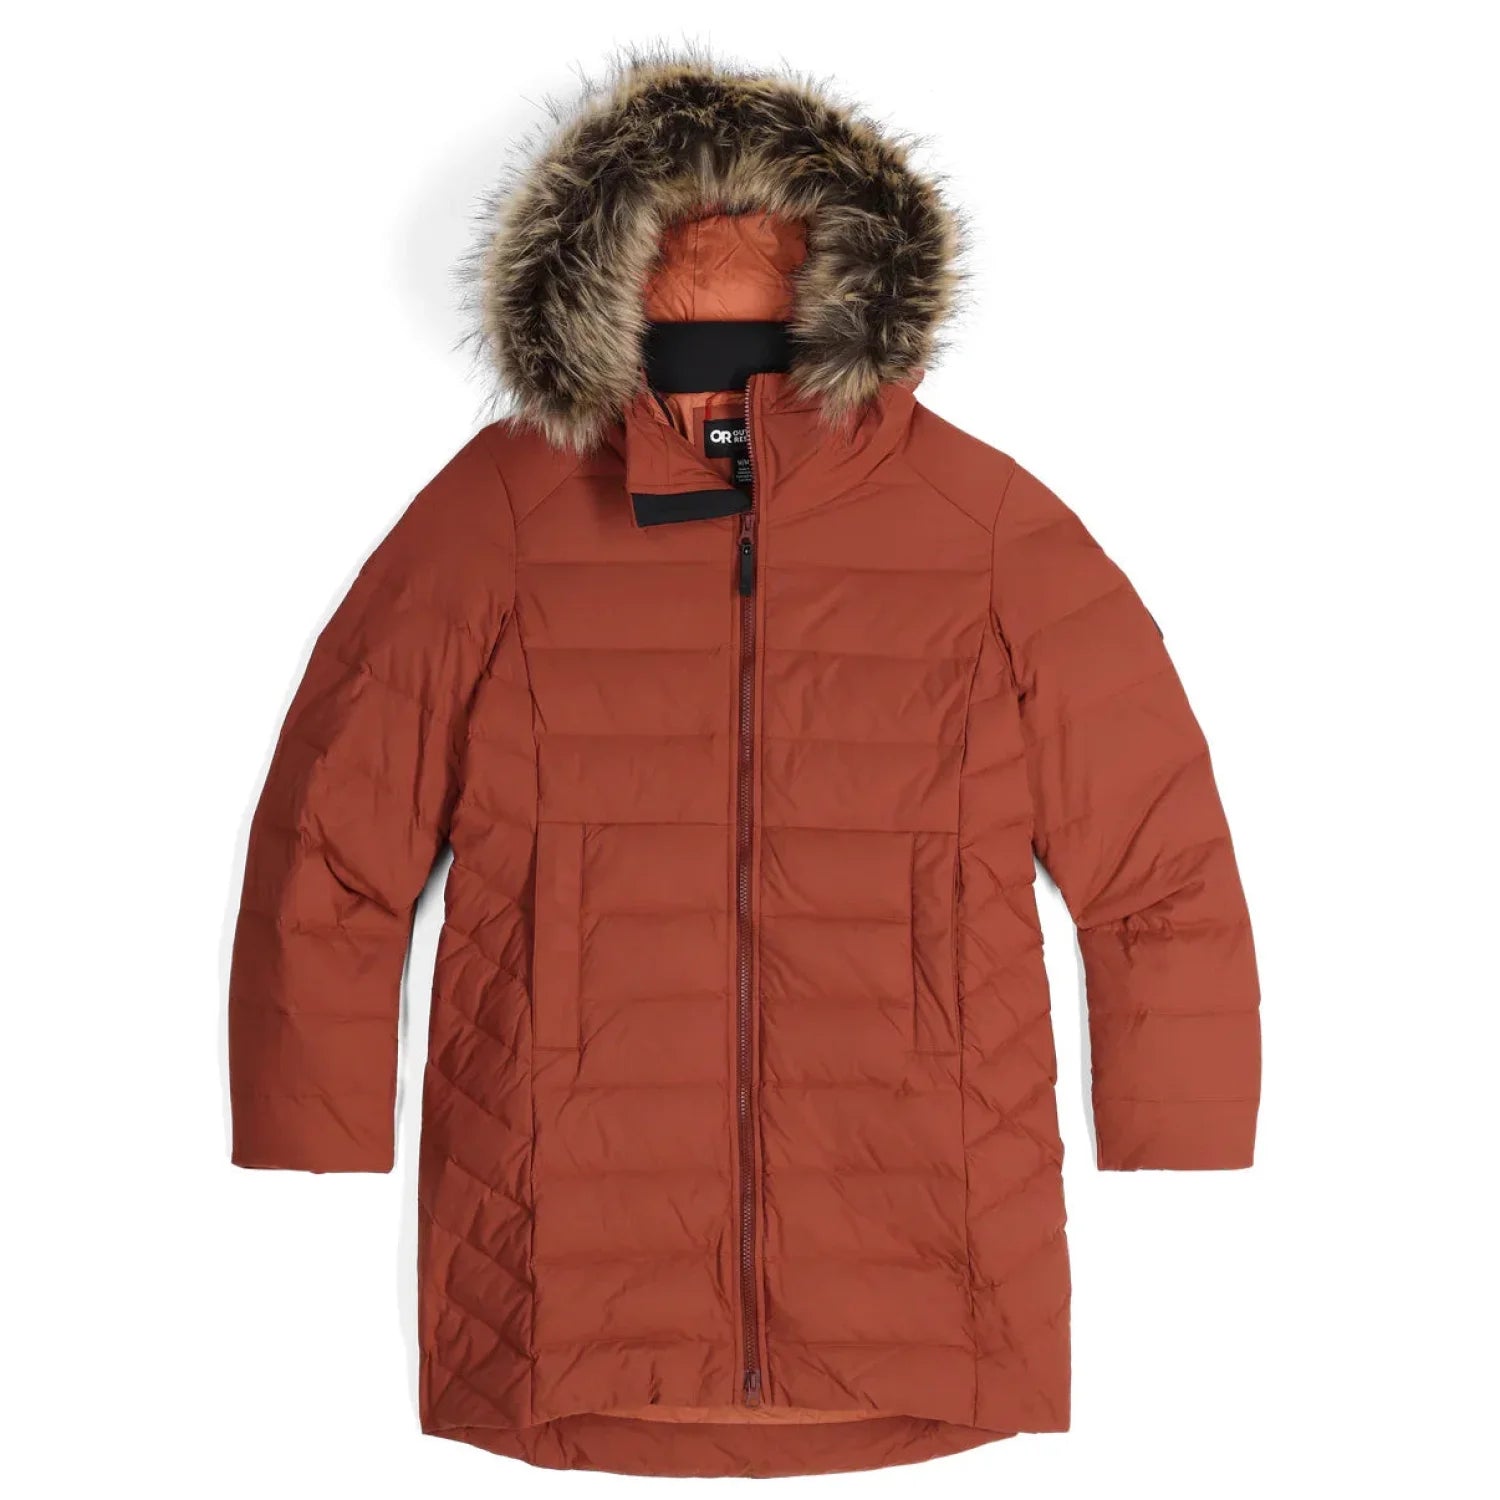 Outdoor Research Women's Coze Lux Down Parka in Brick. A mid-length puffer jacket in a dark orange with a faux fur collar. Laying flat.